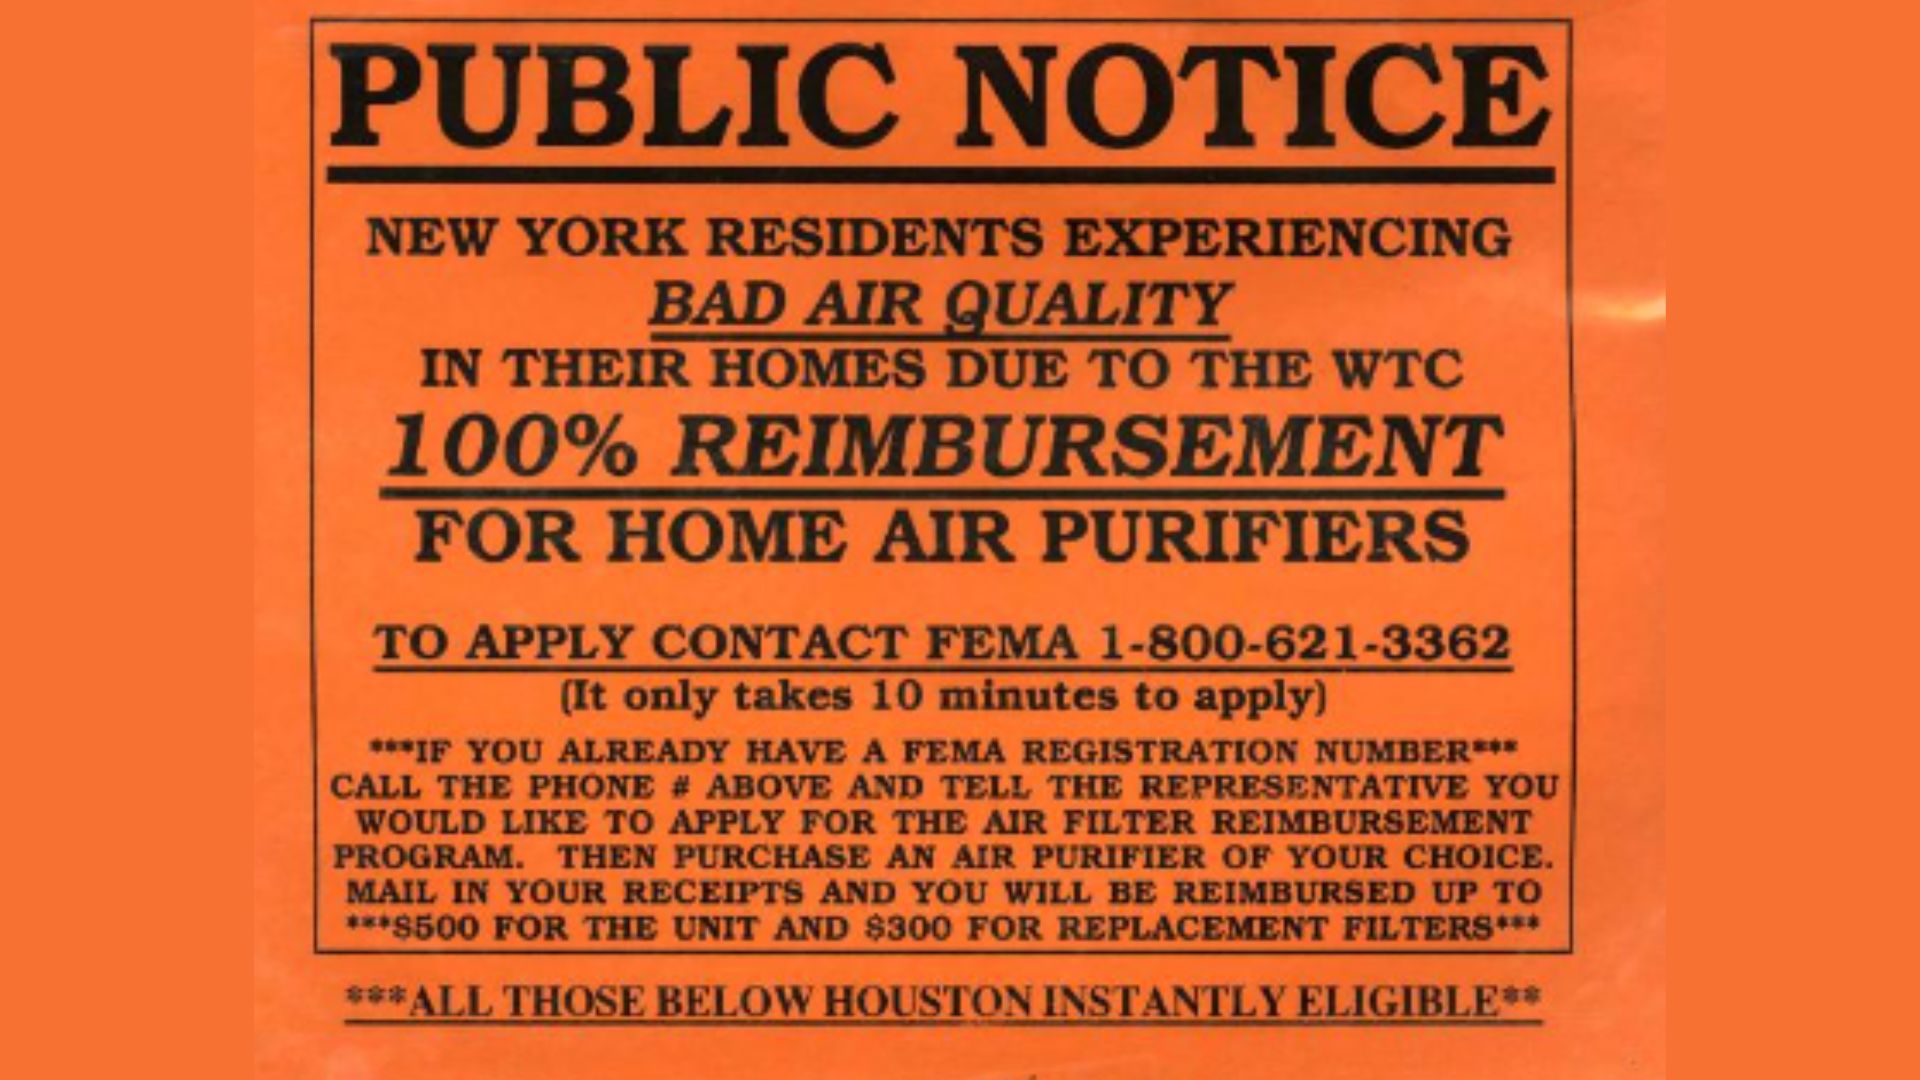 A public notice set in black type against an orange background, notifying residents of potentially toxic air